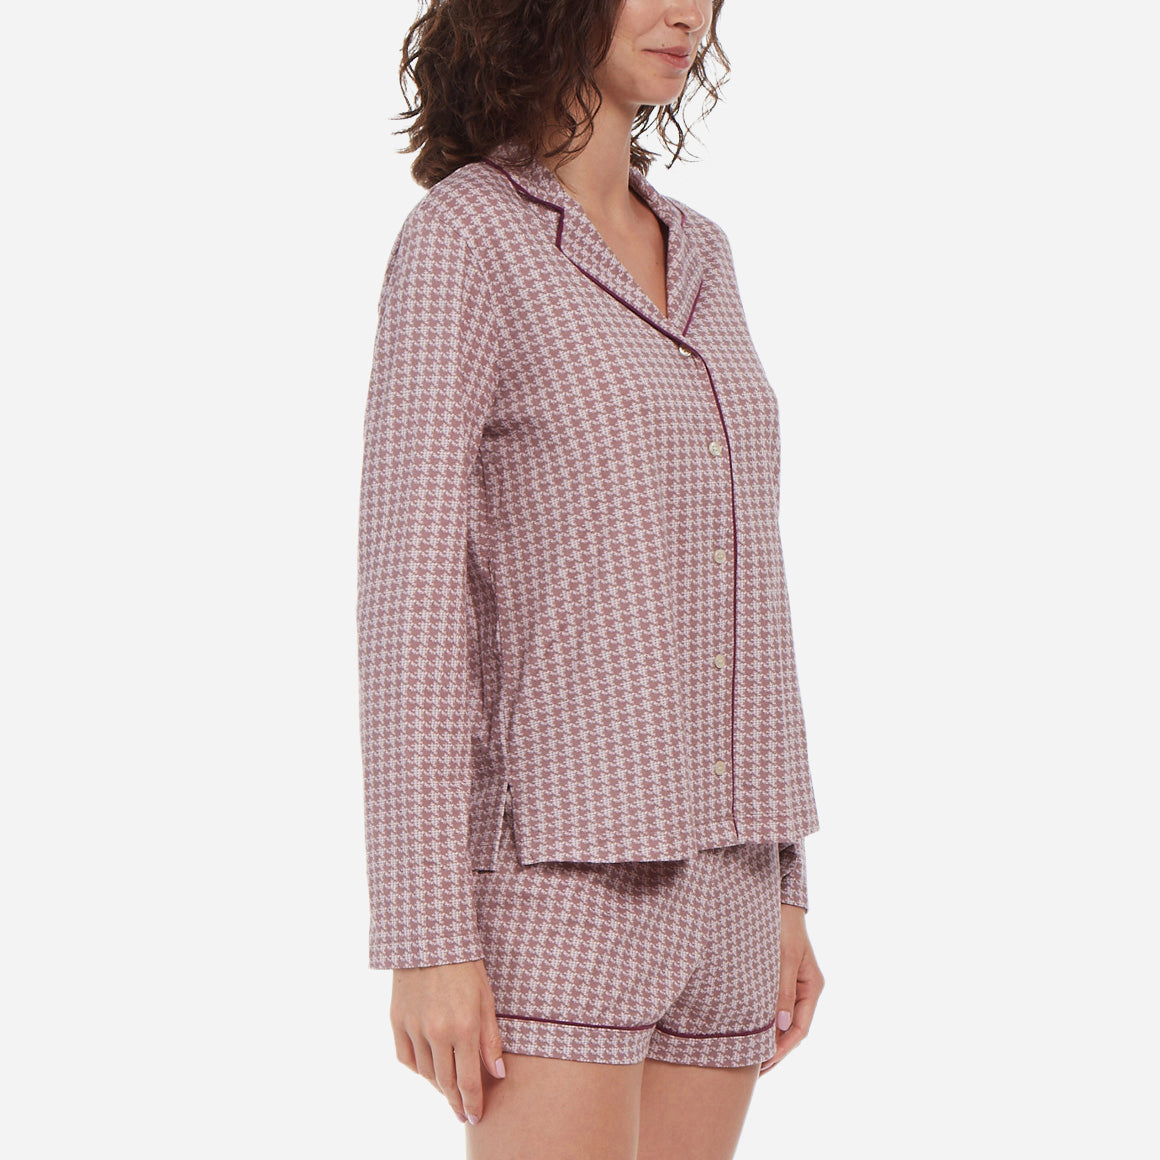 Side facing model wearing a long sleeve button up top and shorts pajama set.